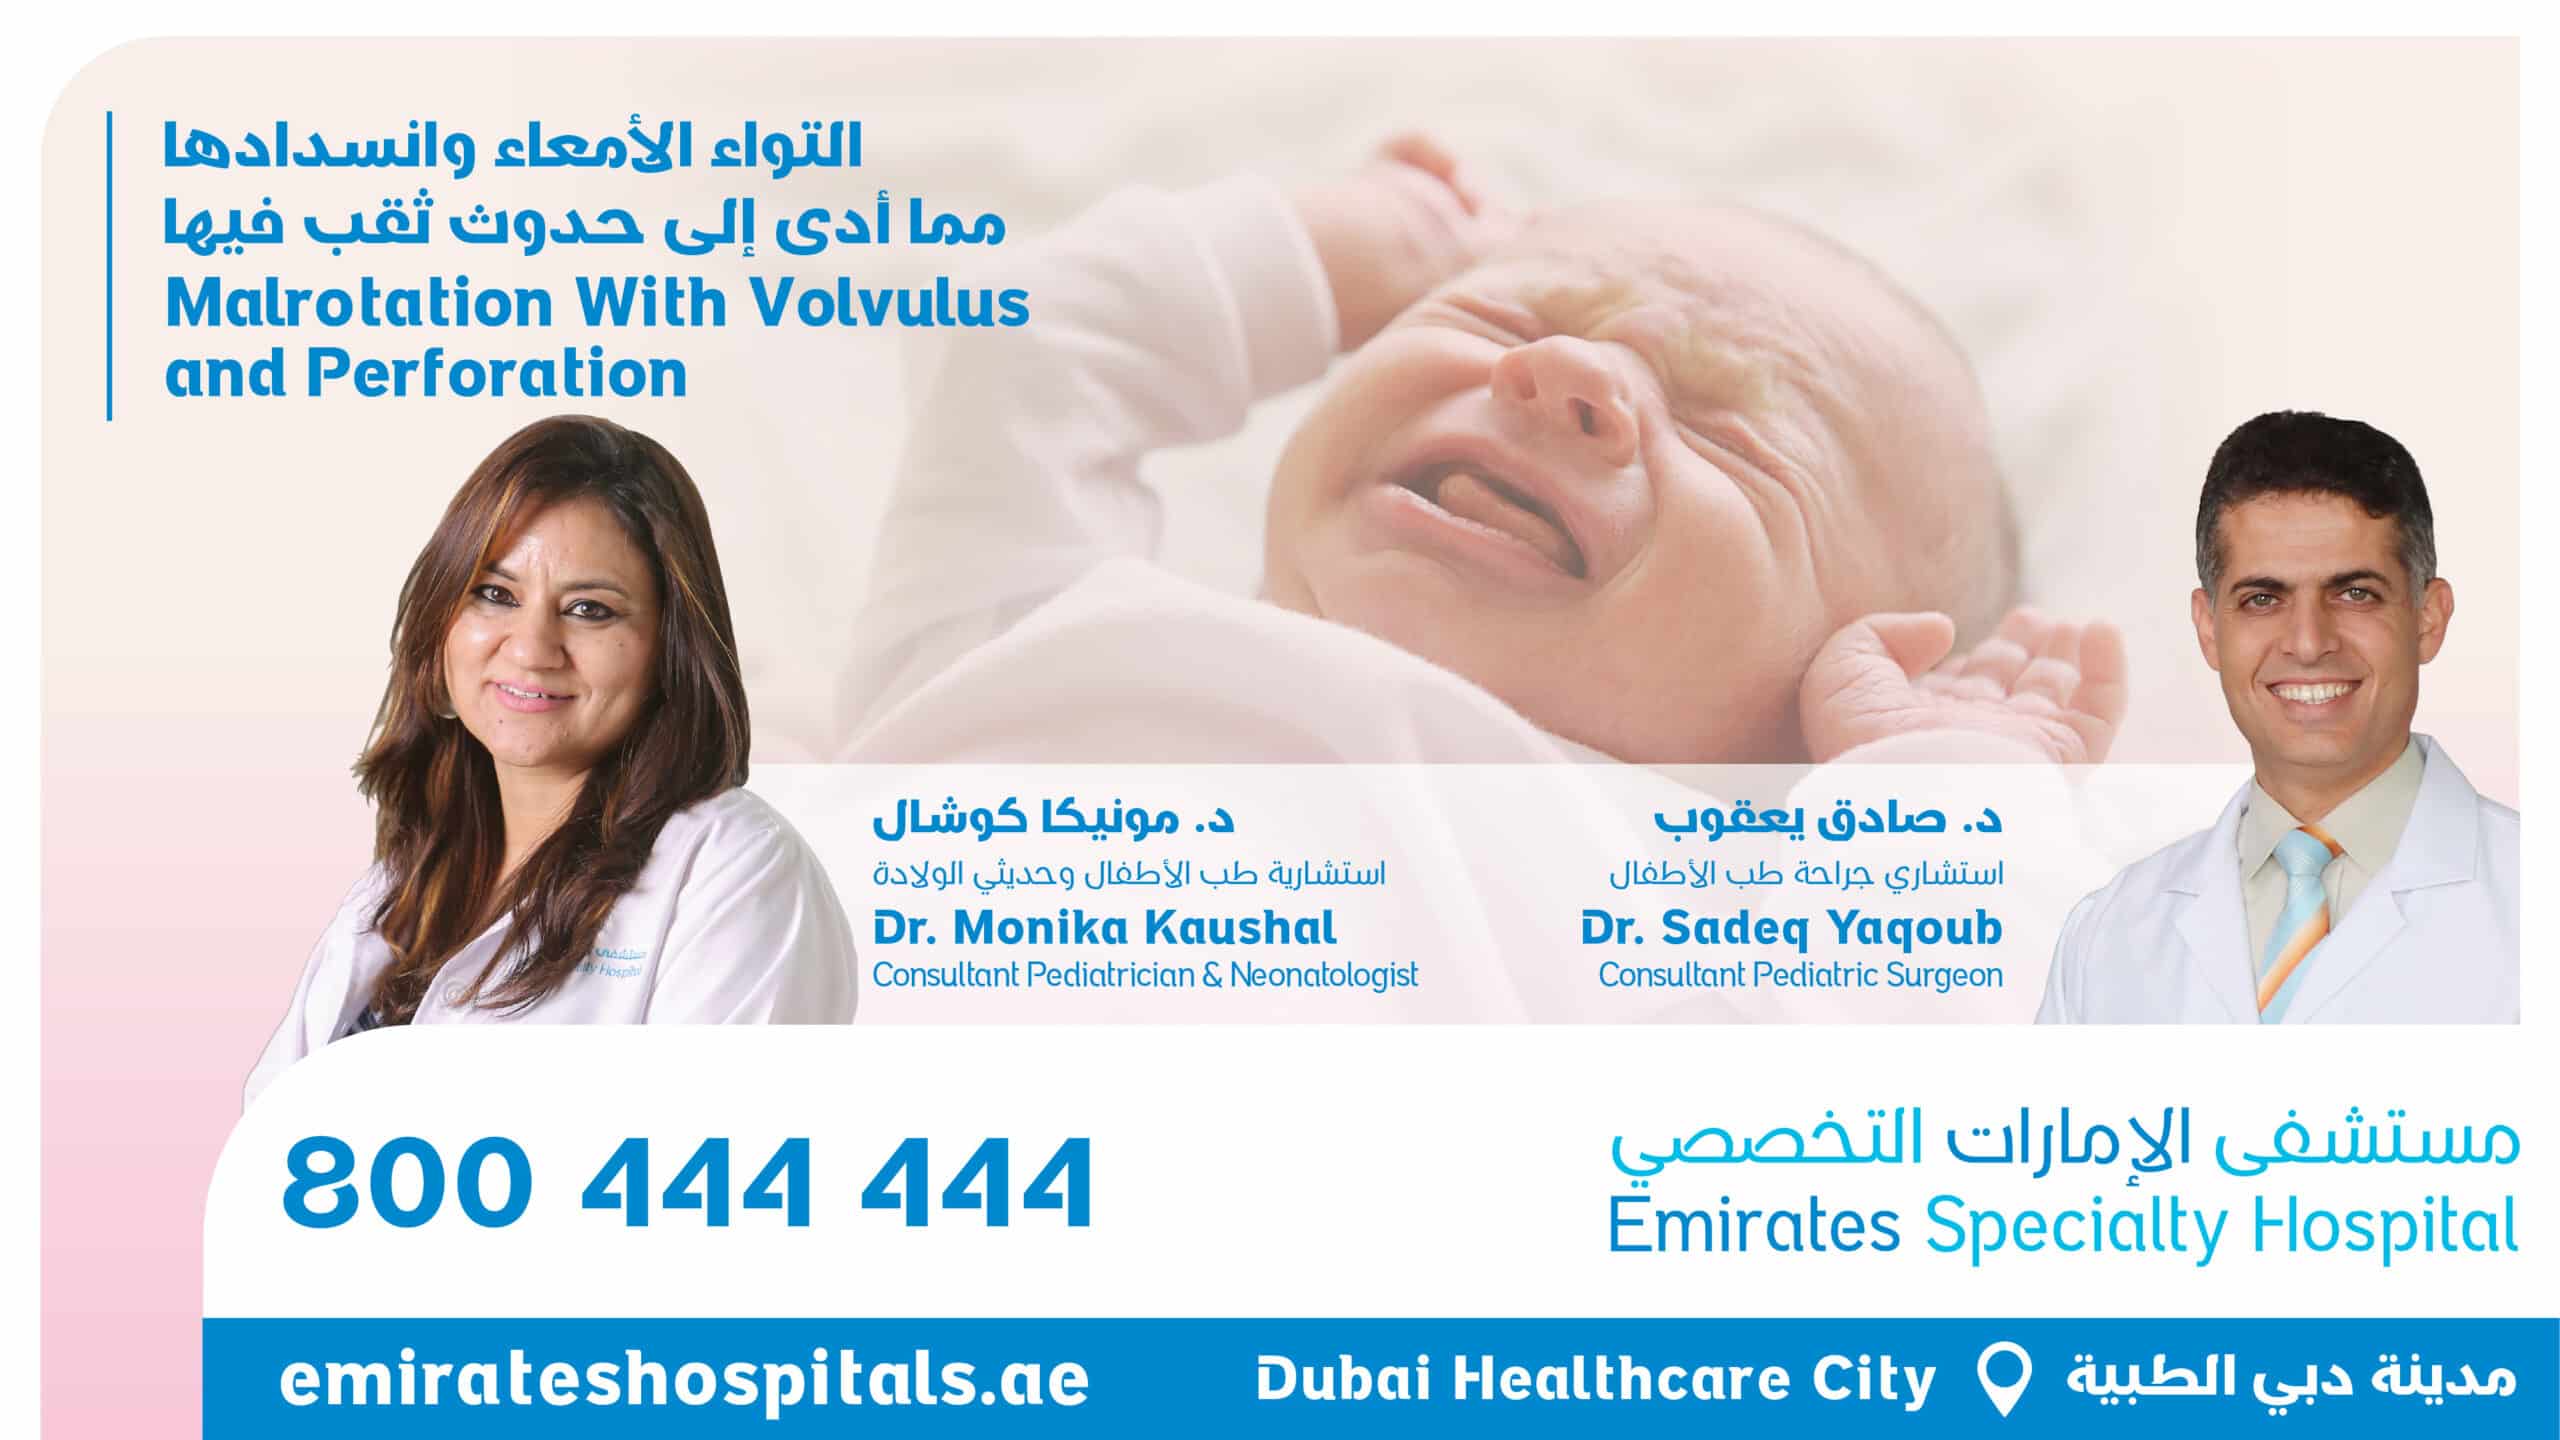 Malrotation With Volvulus and Perforation - Dr. Monika Kaushal , Consultant Pediatrician & Neonatologist and Dr. Sadeq Yaqoub , Consultant Pediatric Surgeon